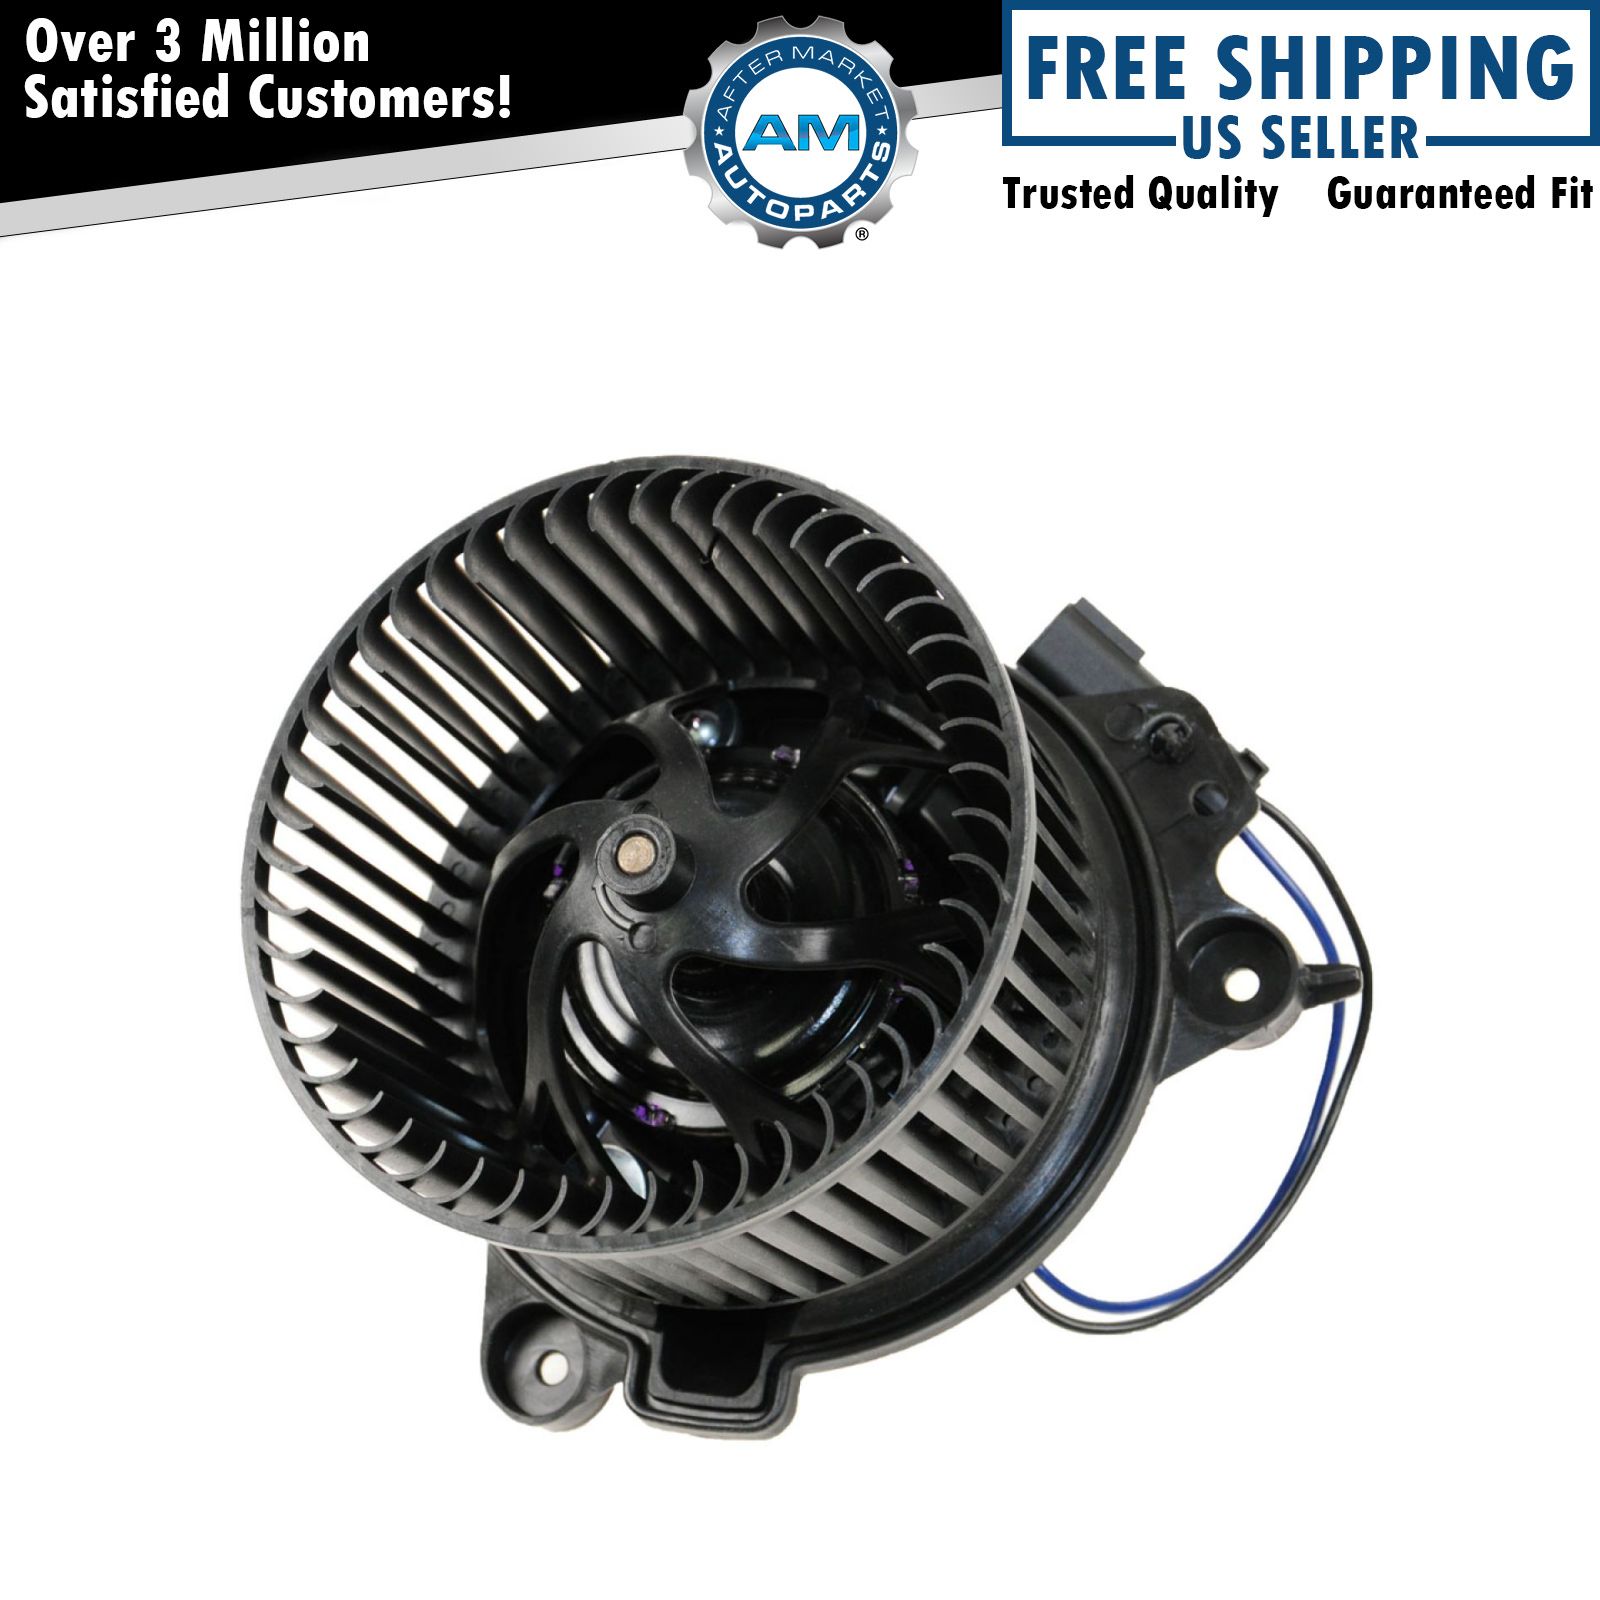 A/C AC Heater Blower Motor w/ Fan Cage for Dodge Plymouth Neon Prowler